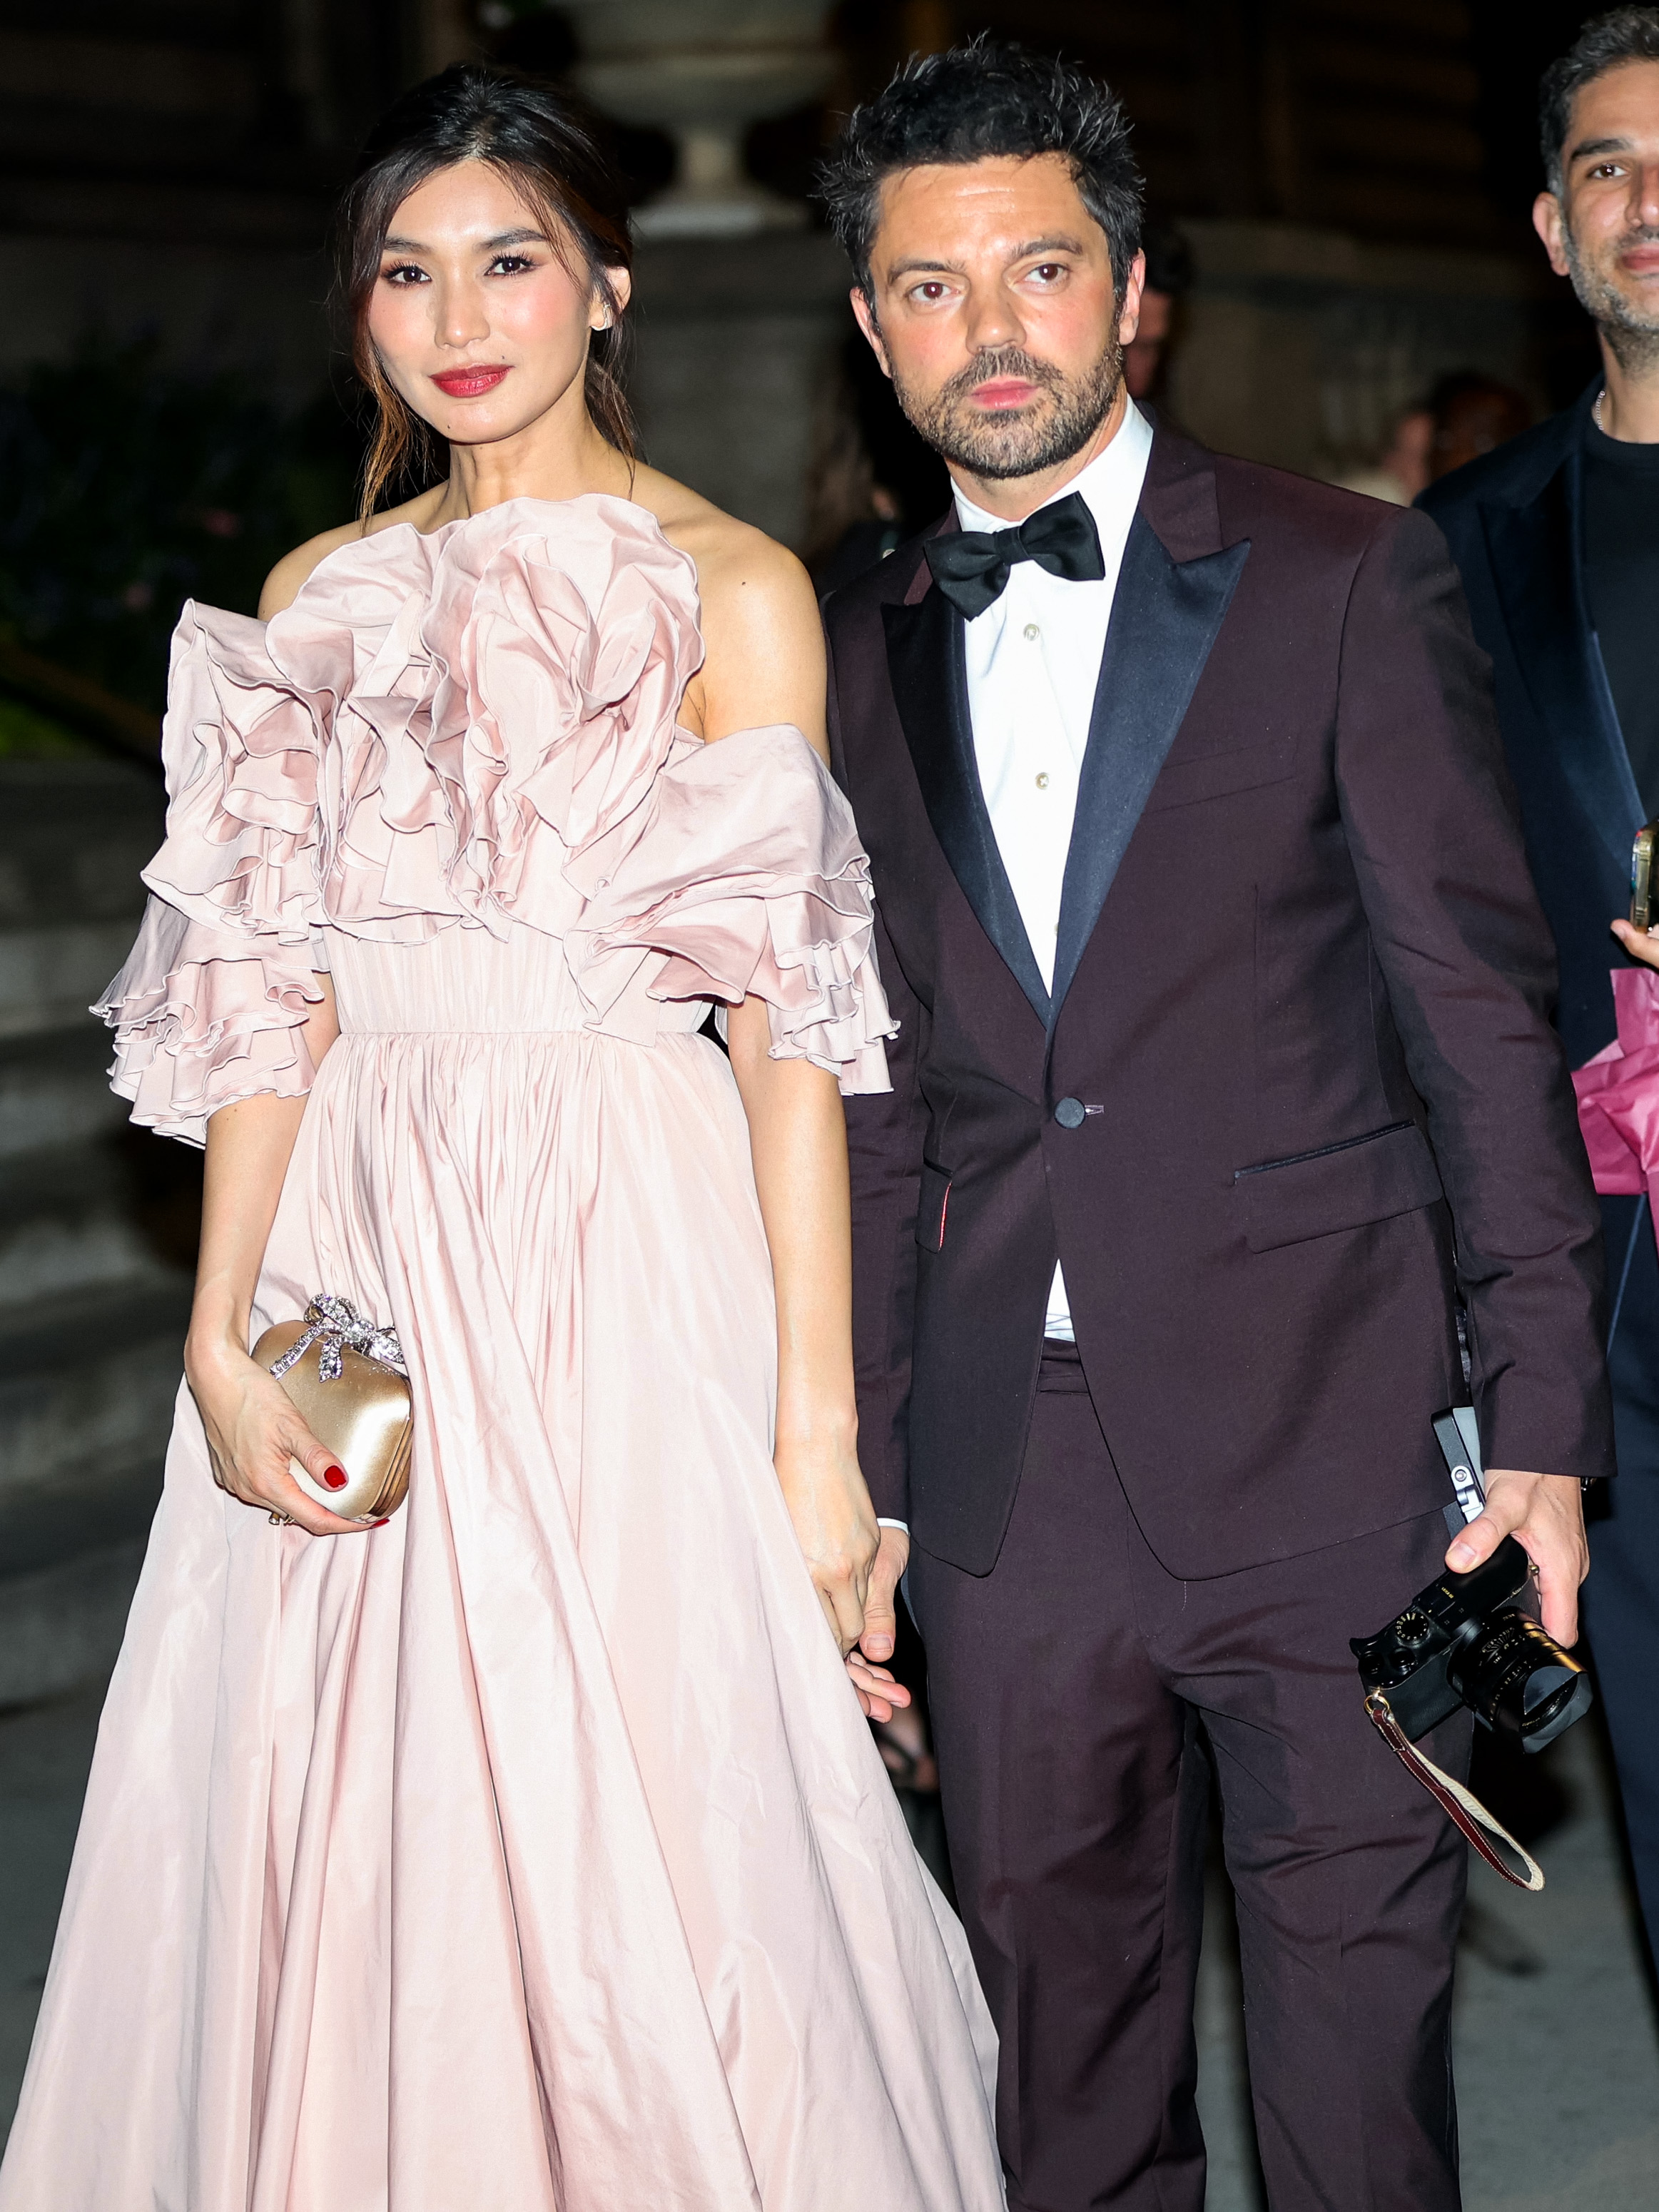 Gemma Chan and Dominic Cooper attend the Clooney Foundation For Justice Inaugural Albie Awards at New York Public Library on September 29, 2022, in New York City. | Source: Getty Images